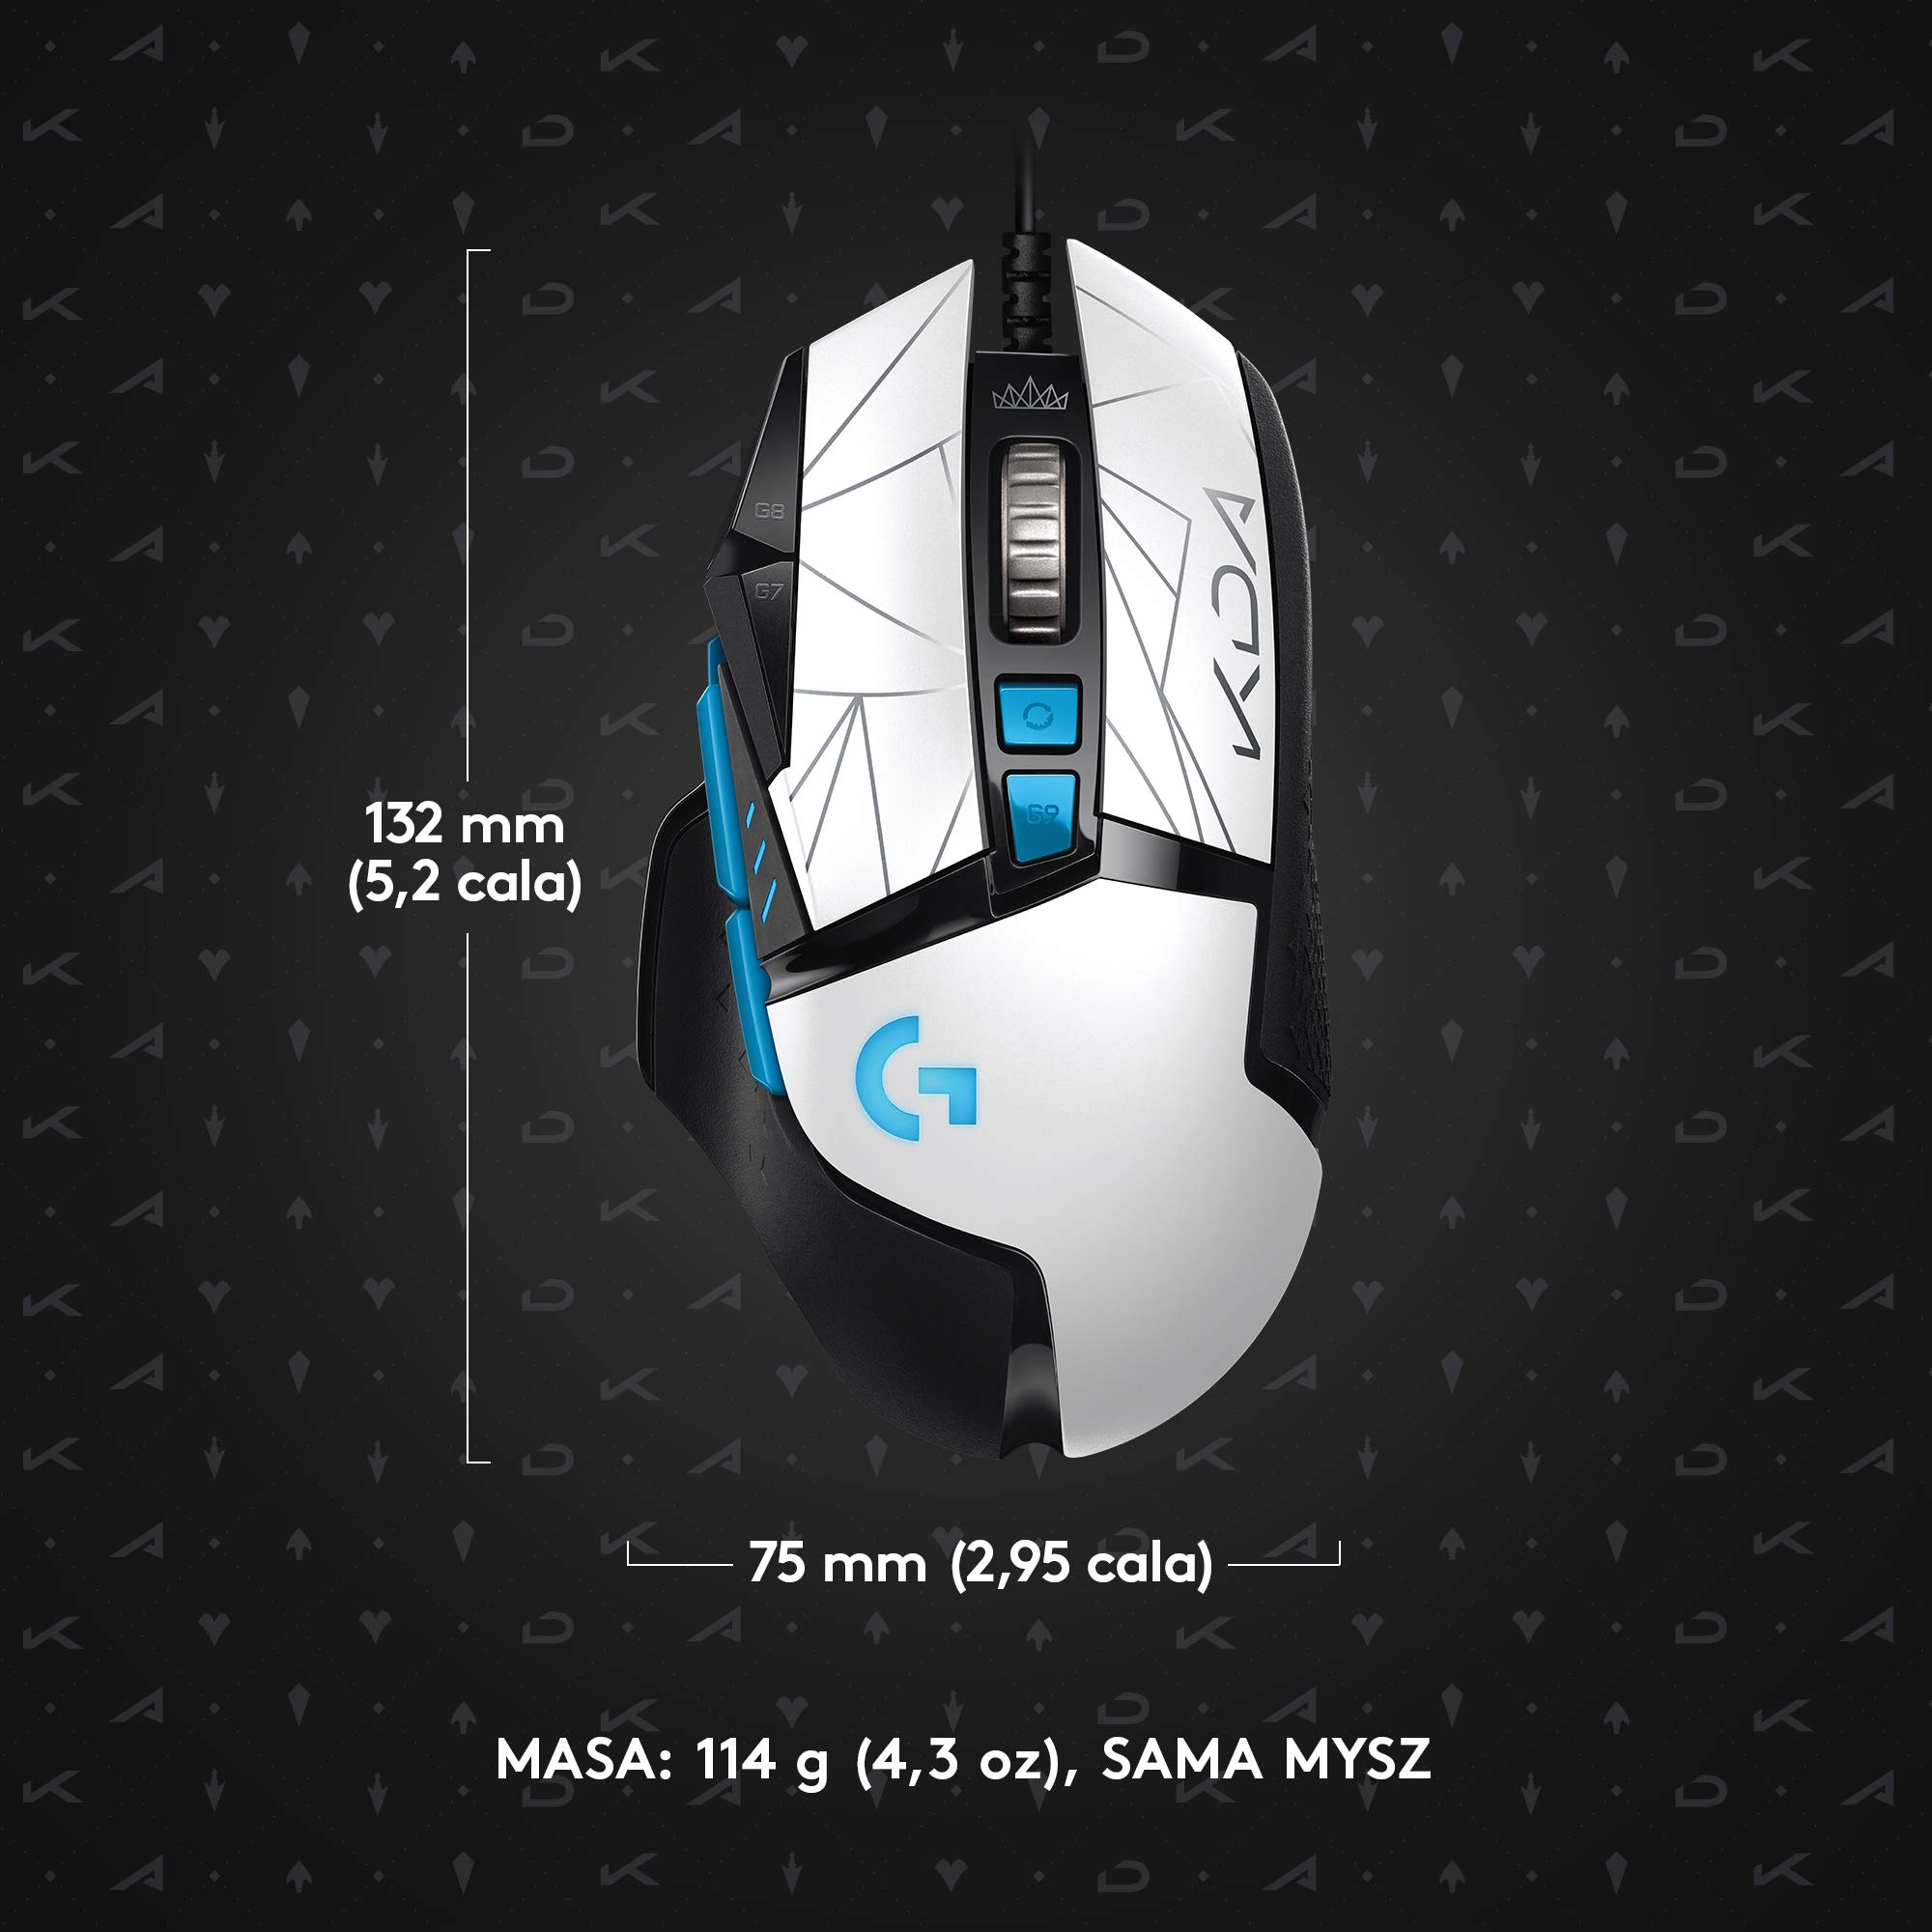 Logitech G502 HERO K/DA High Performance Wired Gaming Mouse, HERO 25K, LIGHTSYNC RGB, 11 Programmable Buttons, On-Board Memory, Official League of Legends Gaming Gear - White (Renewed)